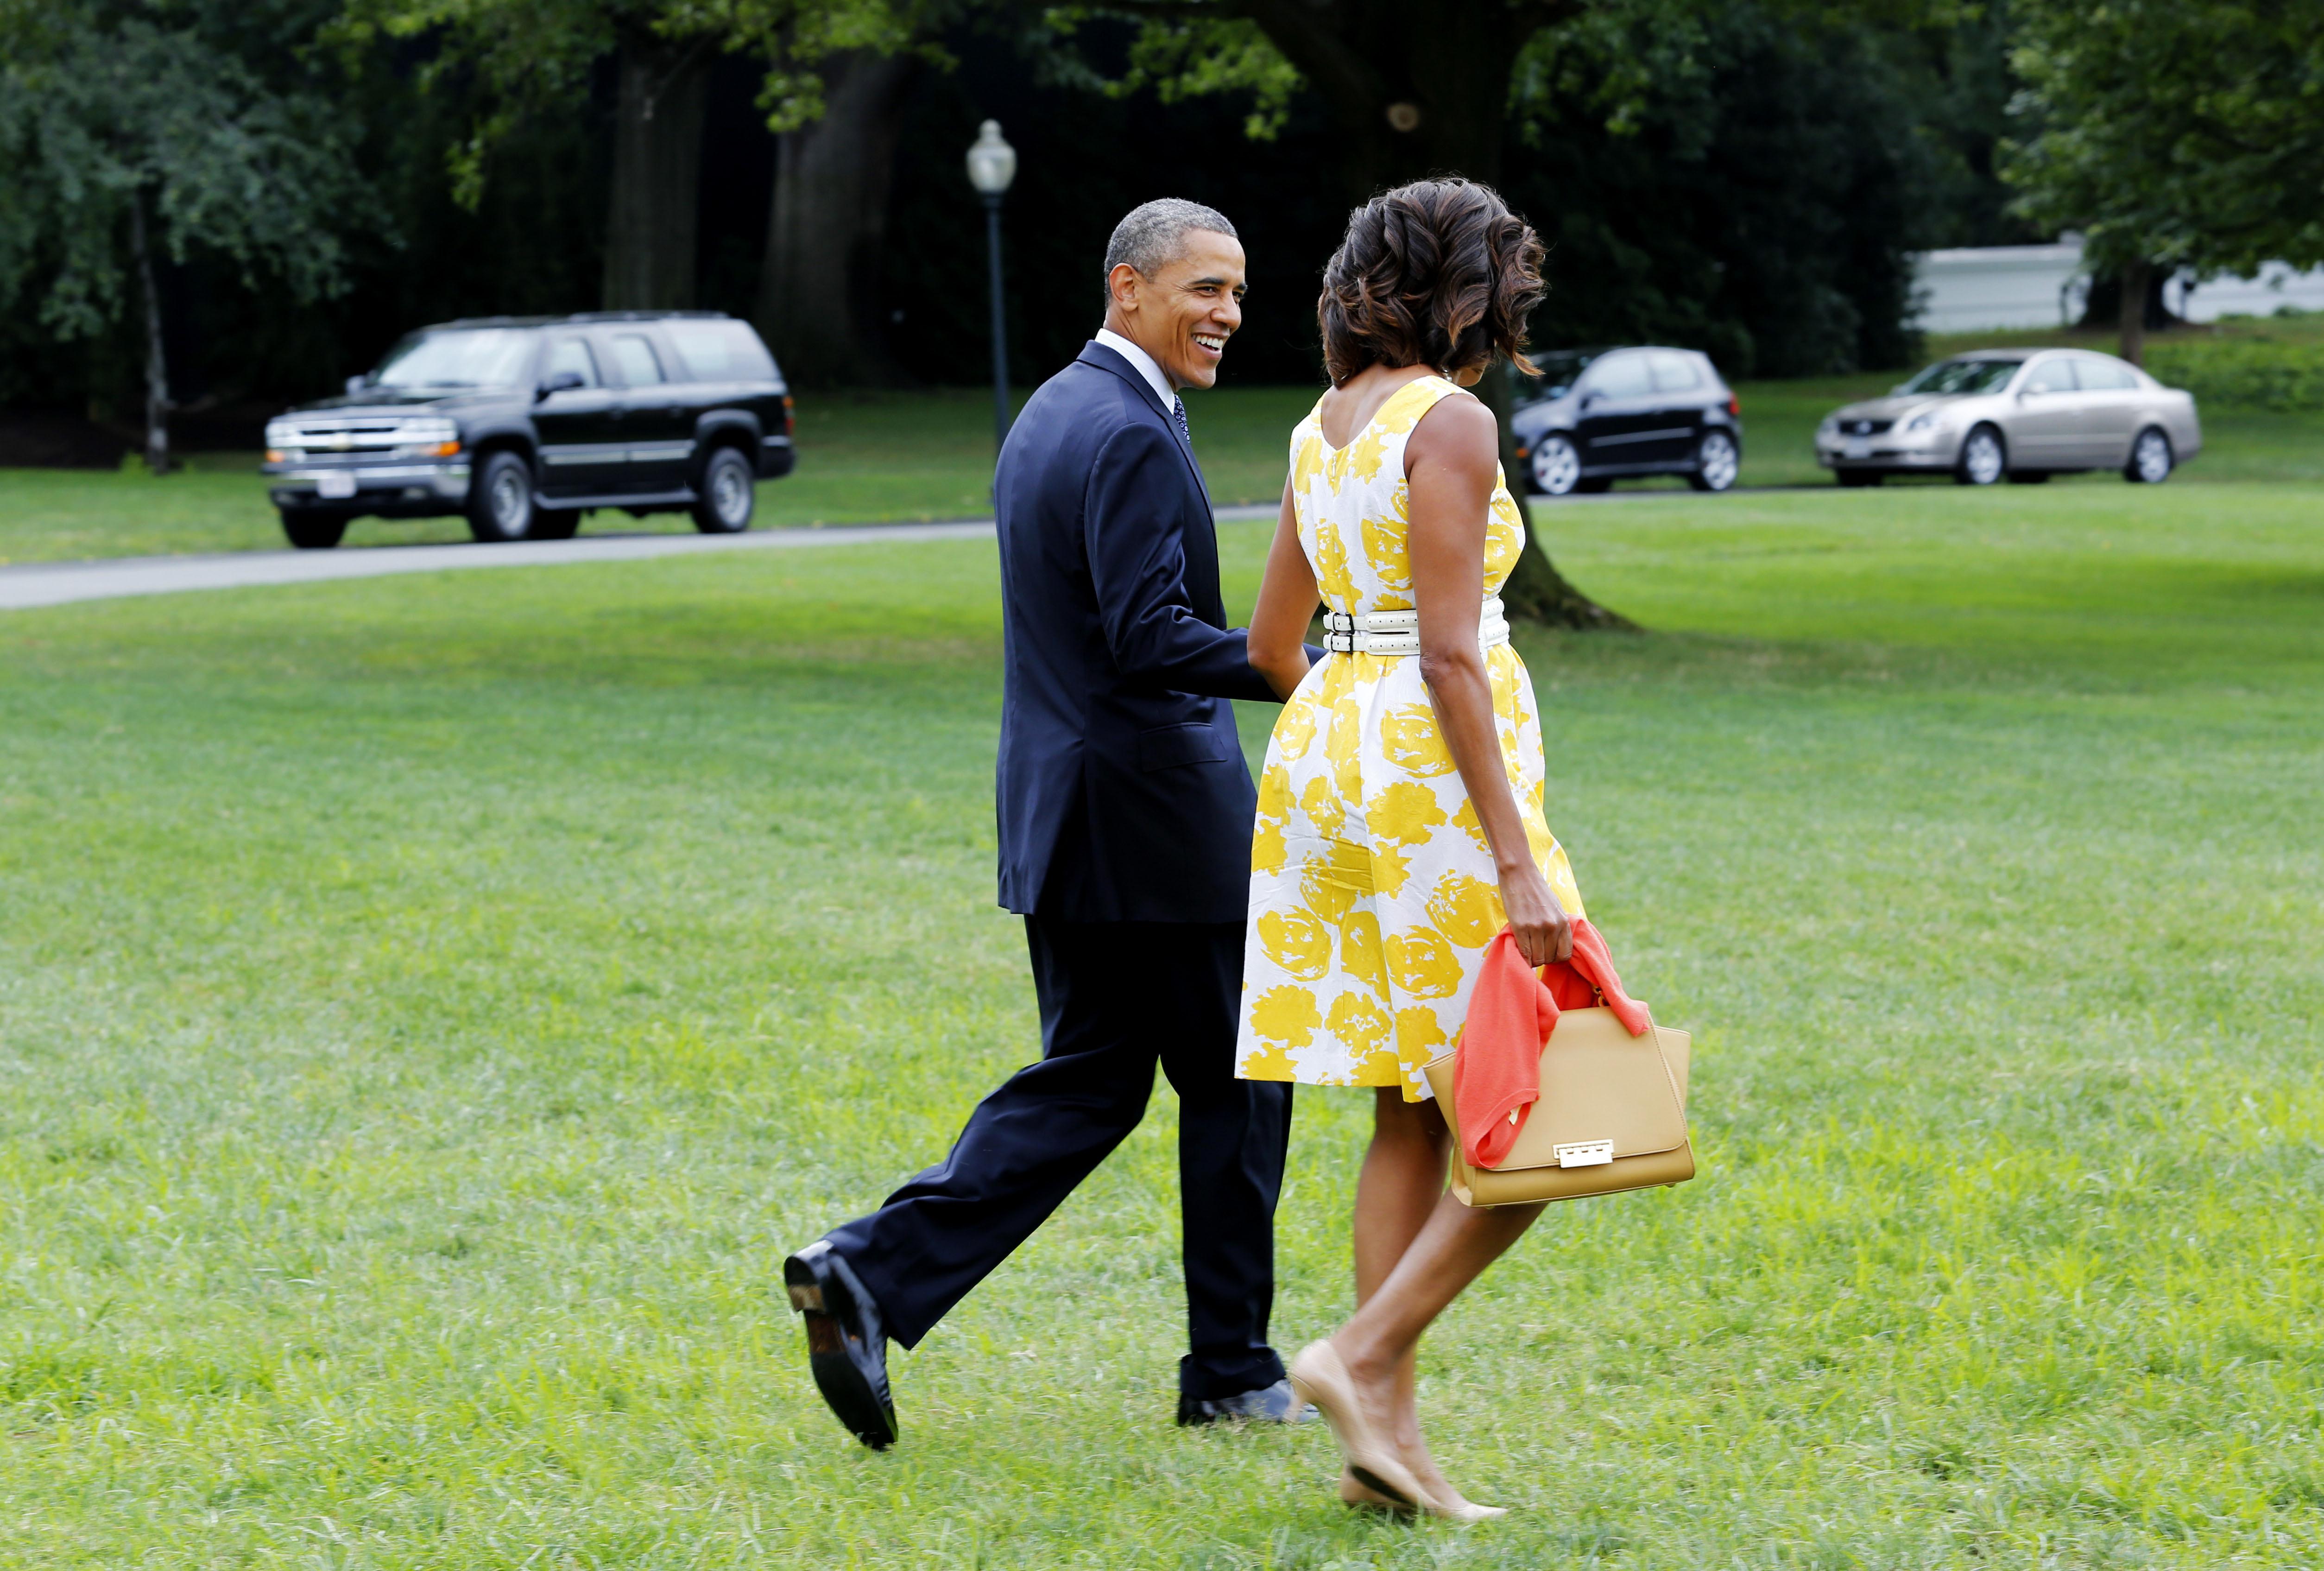 United States President Barack Obama and first lady Michelle Obama depart the White House in Washington, D.C. en route to Joint Base Andrews for a trip to Orlando, Florida where they will address injured veterans at the Disabled American Veterans National Convention on Saturday, August 10, 2013. In the afternoon, they will depart Orlando for Martha's Vineyard, Massachusetts. Credit: Aude Guerrucci / Pool via CNP Reporters / DPA